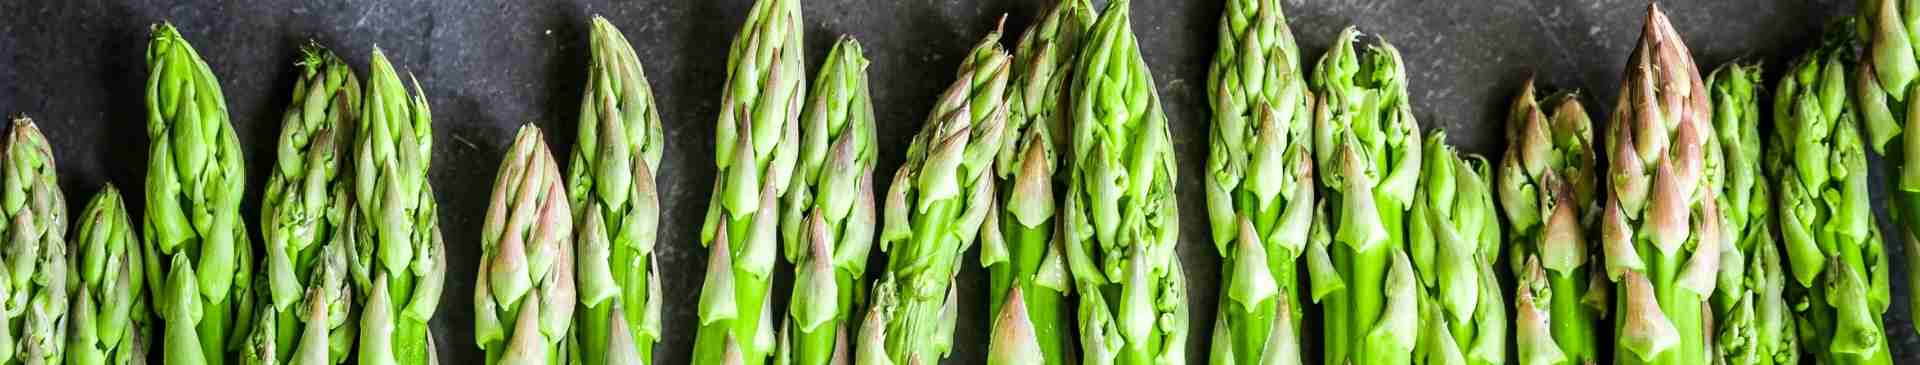 How to Plant Asparagus Crowns to Grow Sweet, Juicy Spears 